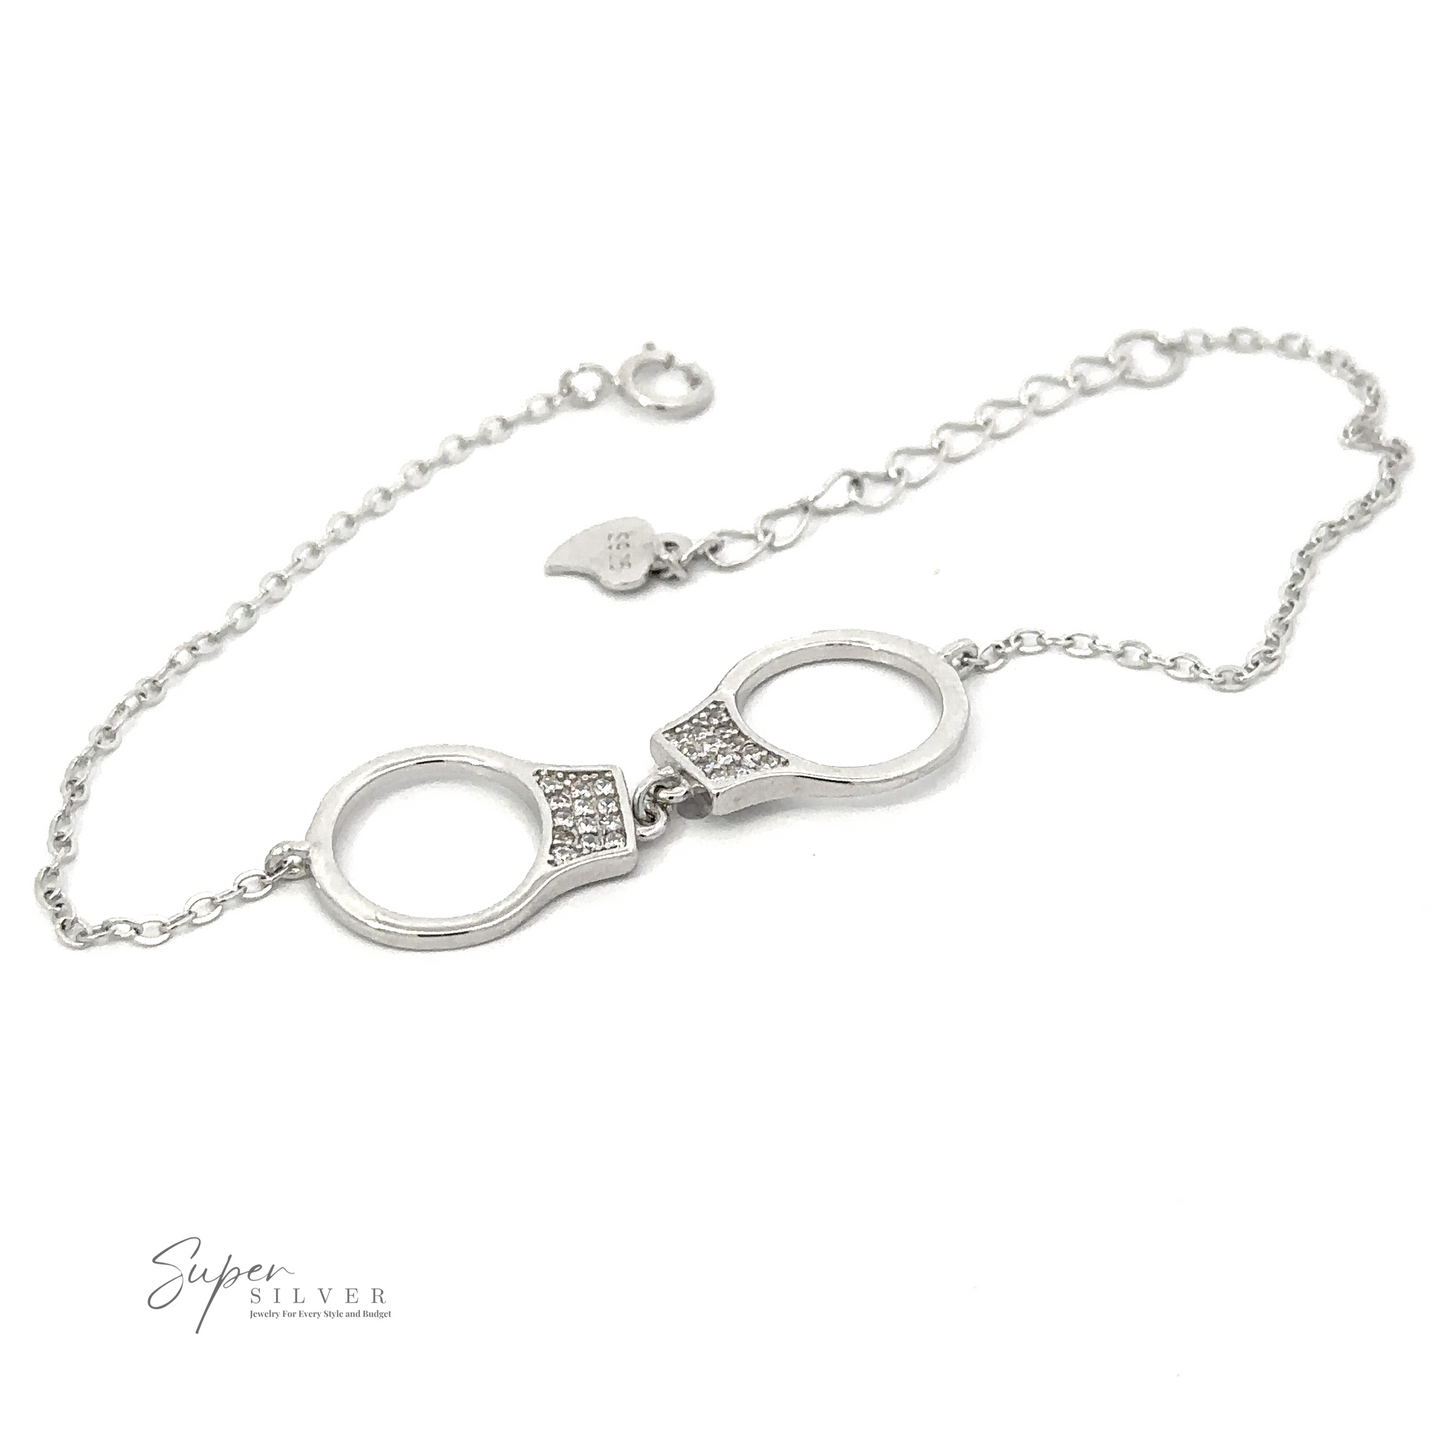 A Delicate Cubic Zirconia Handcuff Bracelet with small handcuff-shaped links and an adjustable chain, featuring the brand name "Super Silver" printed in the bottom left corner.